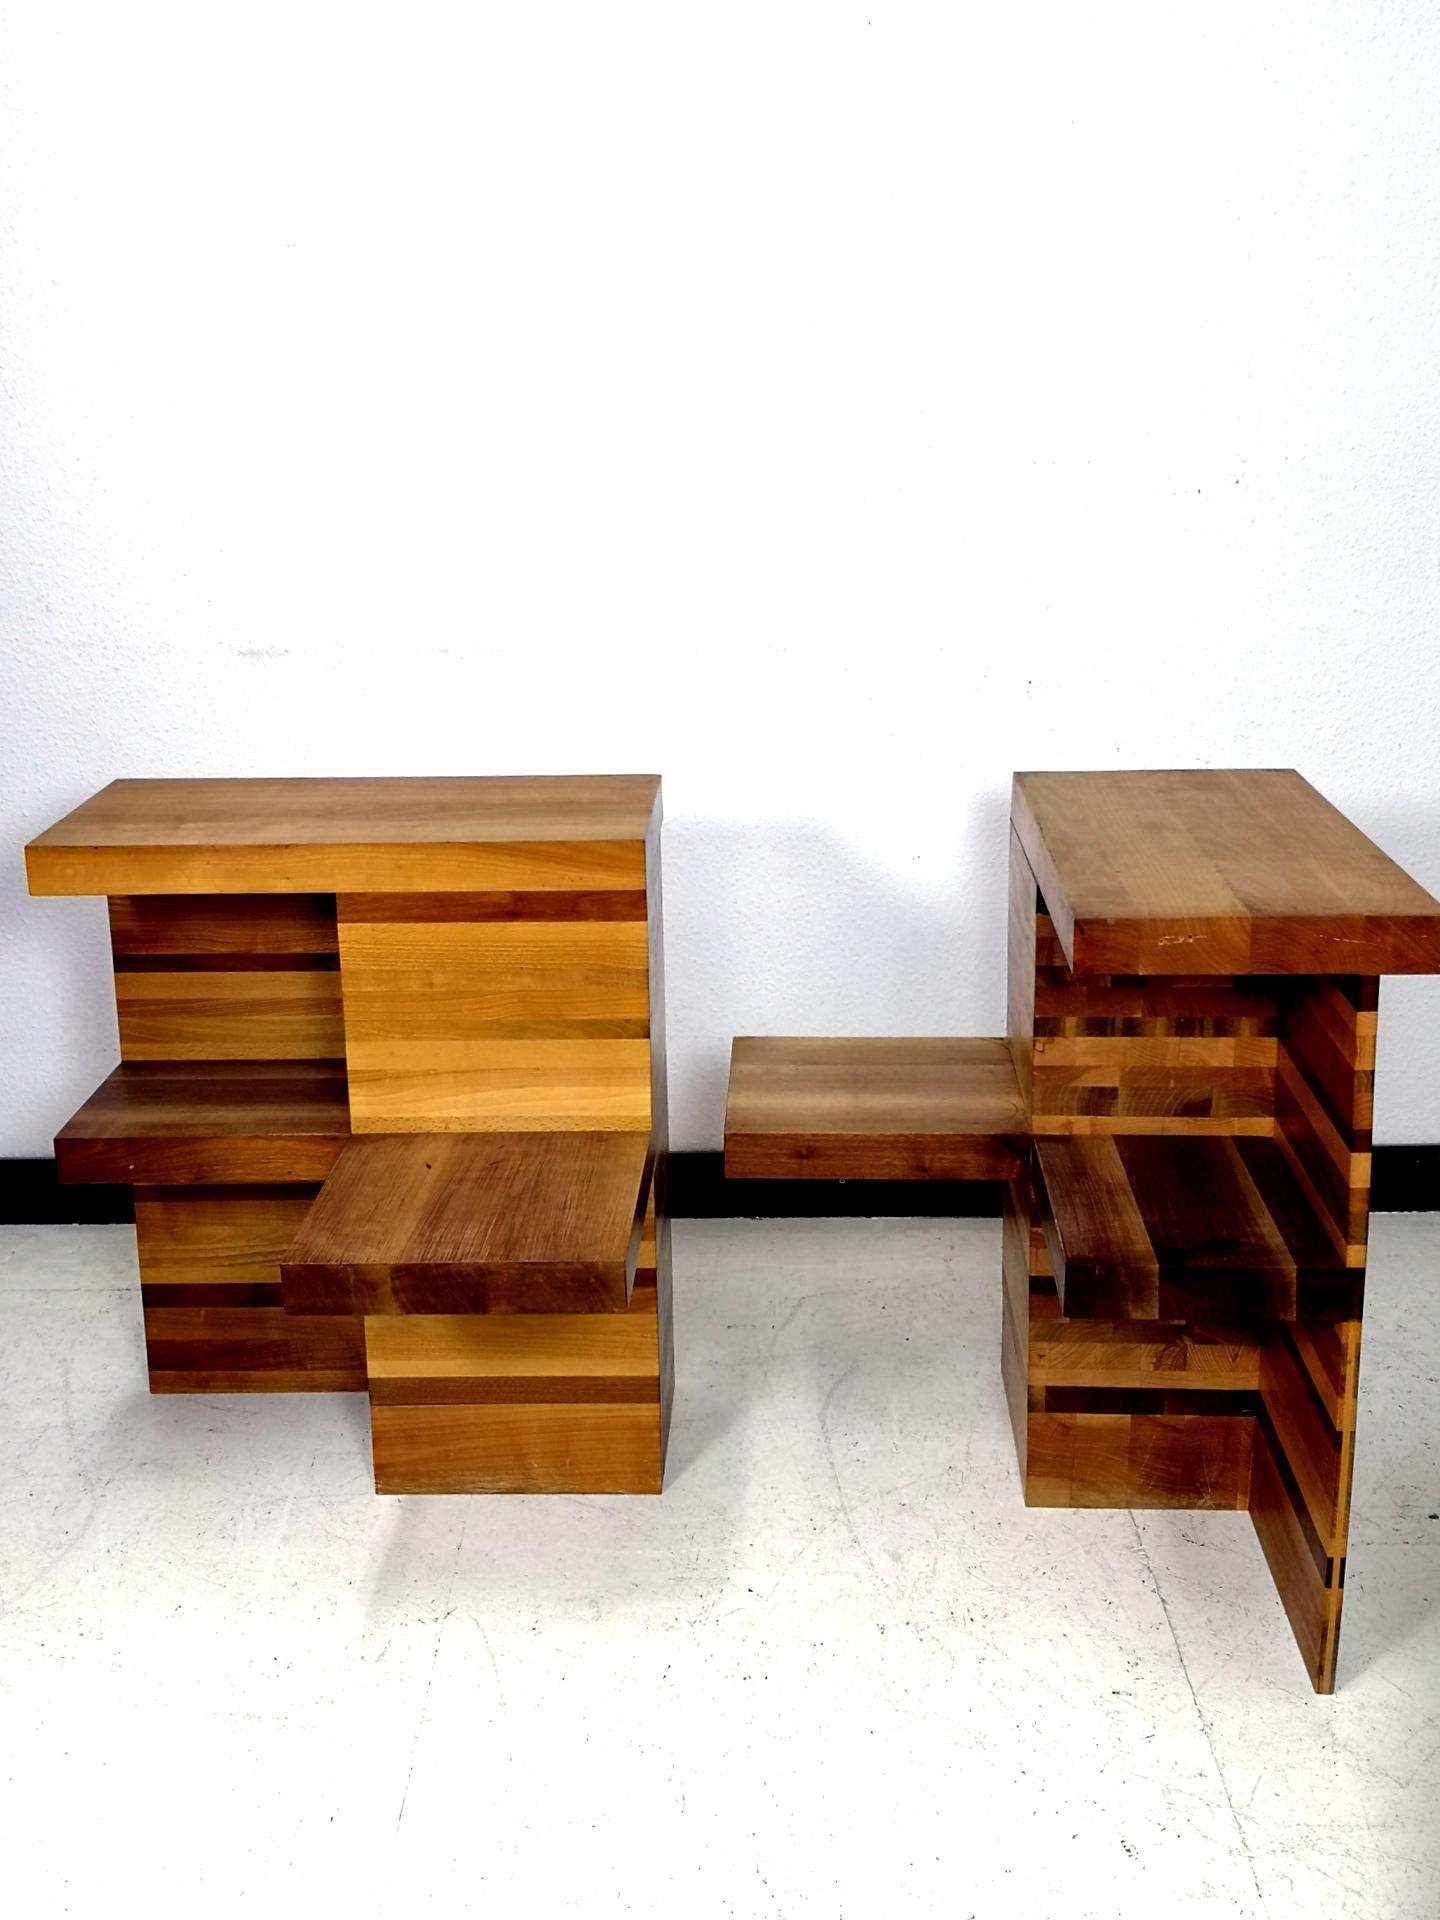 Specially designed Brutalist nightstands from circa 1970s in Brutalist style made of hardwood mixtures.